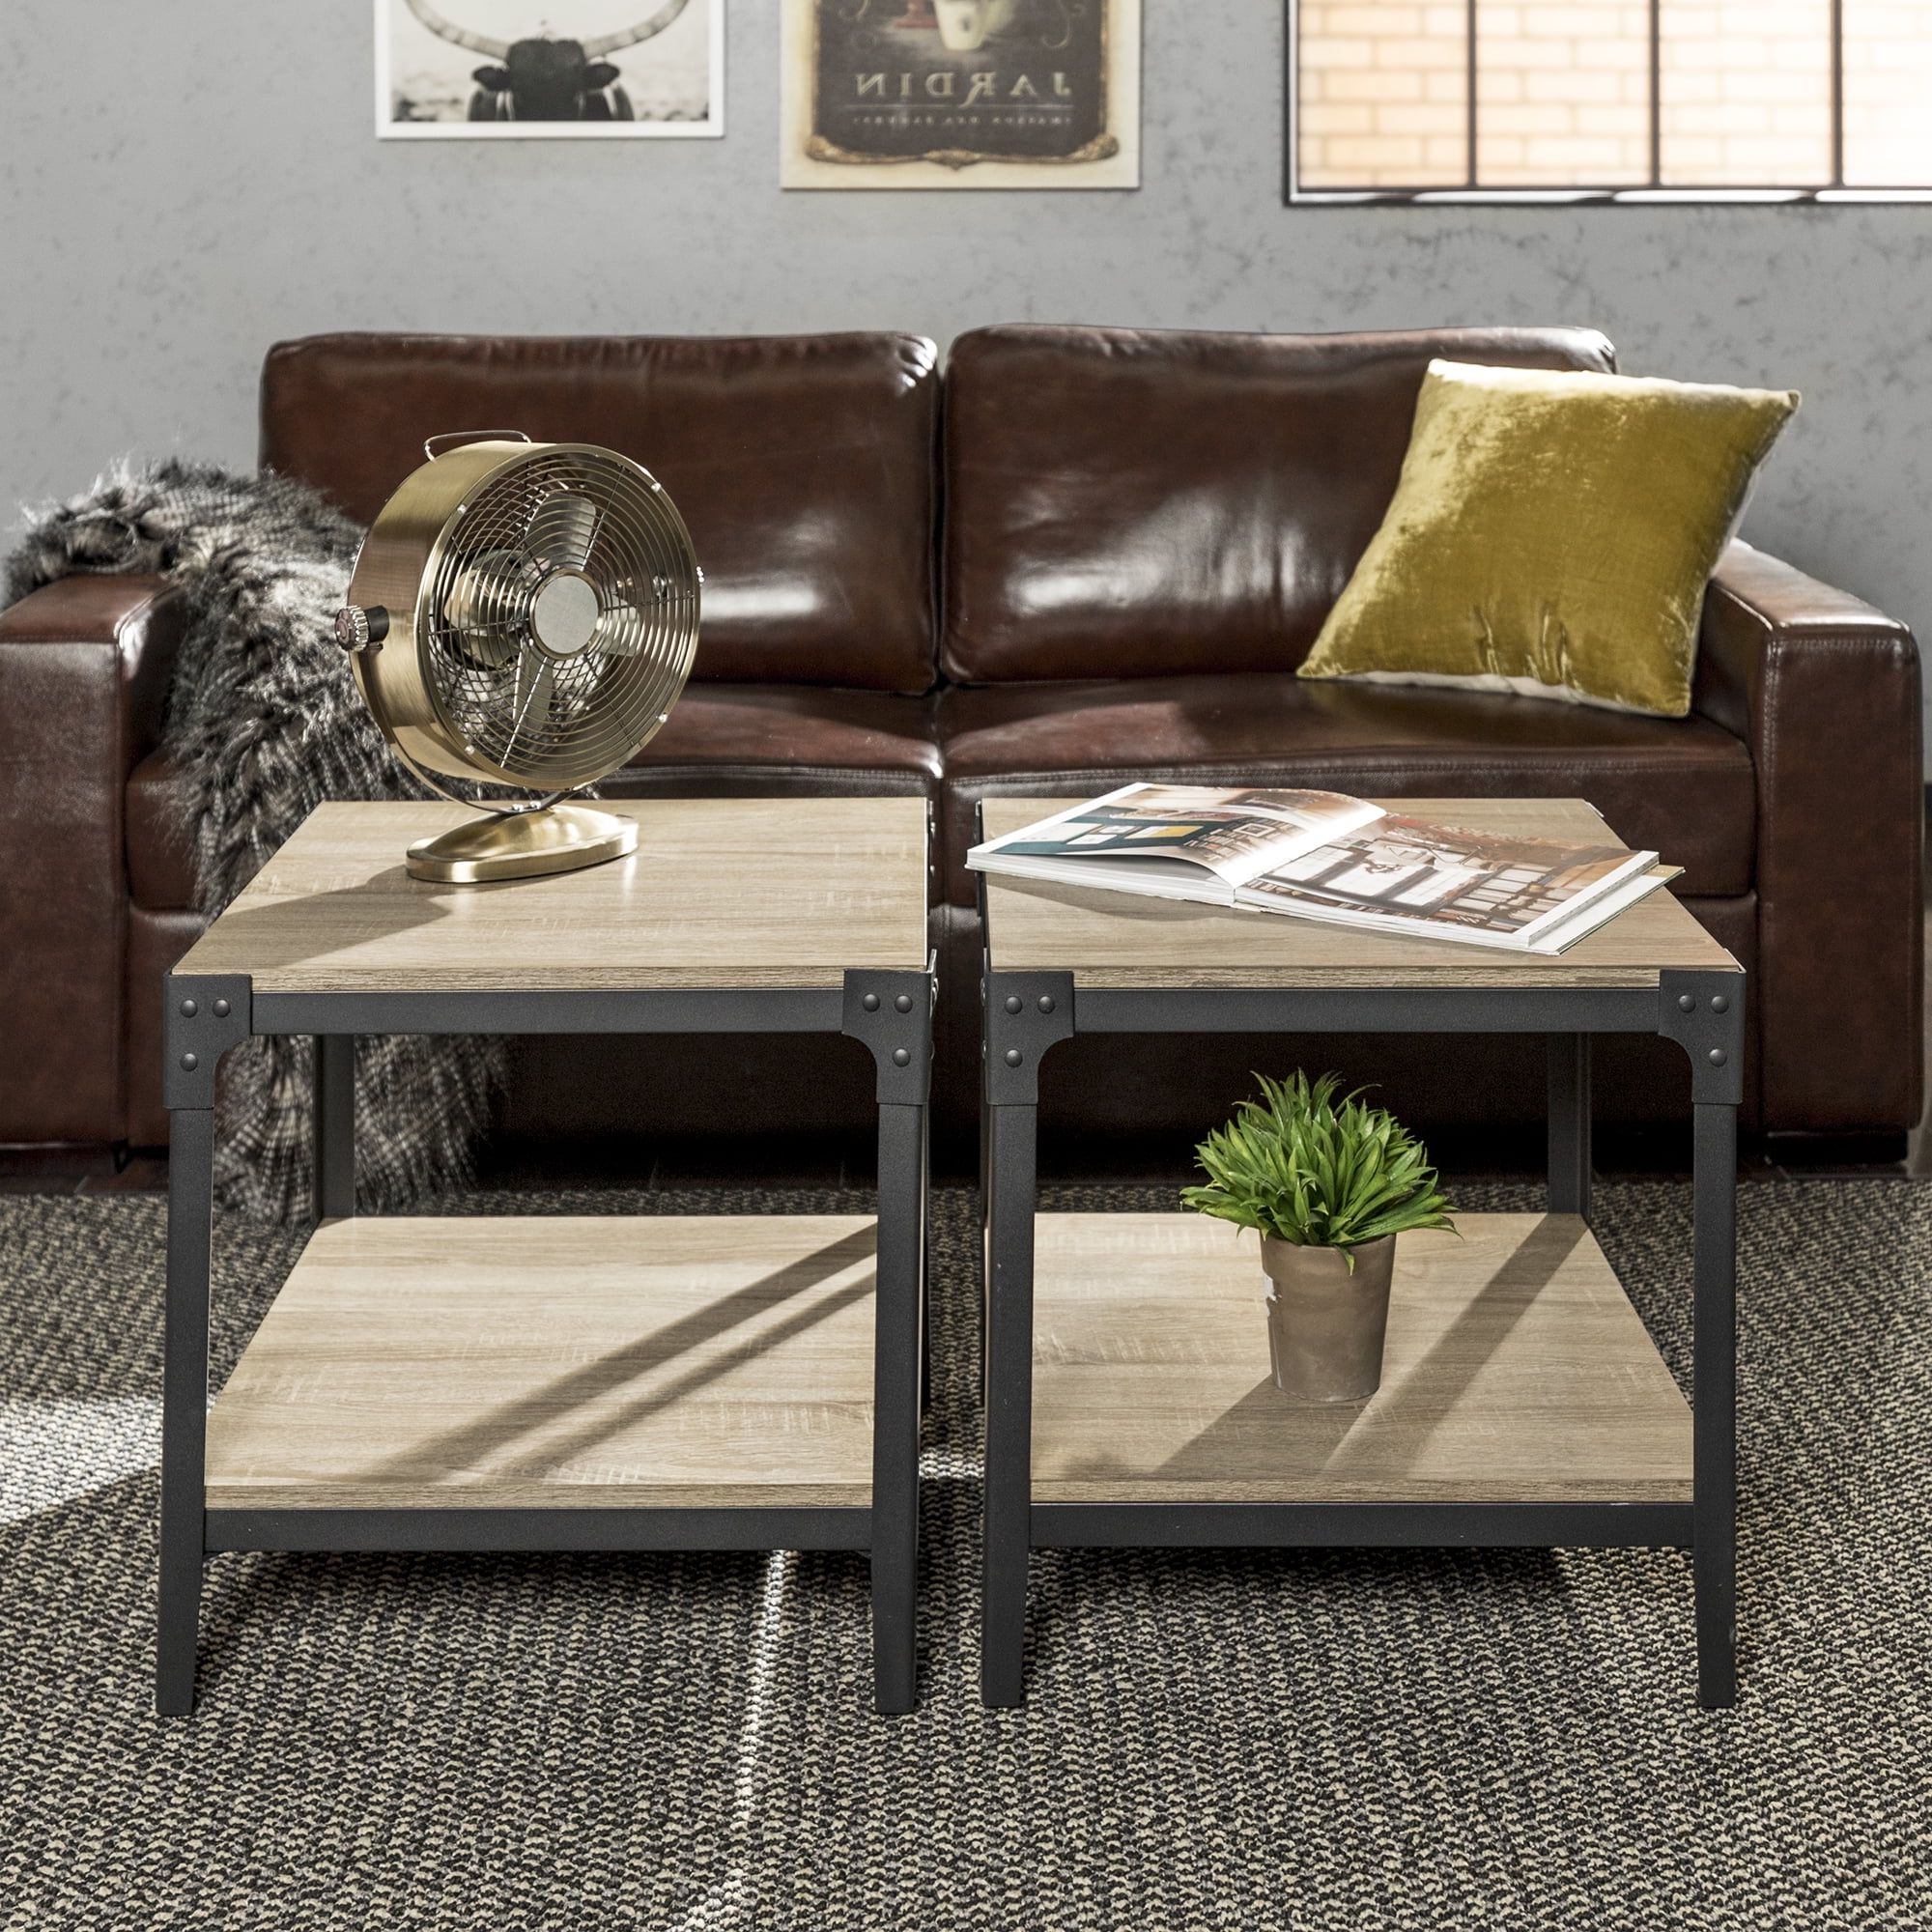 Woven Paths Coffee Tables With Regard To Most Popular Woven Paths Wilson Riveted End Tables, Set Of 2, Driftwood – Walmart (View 13 of 15)